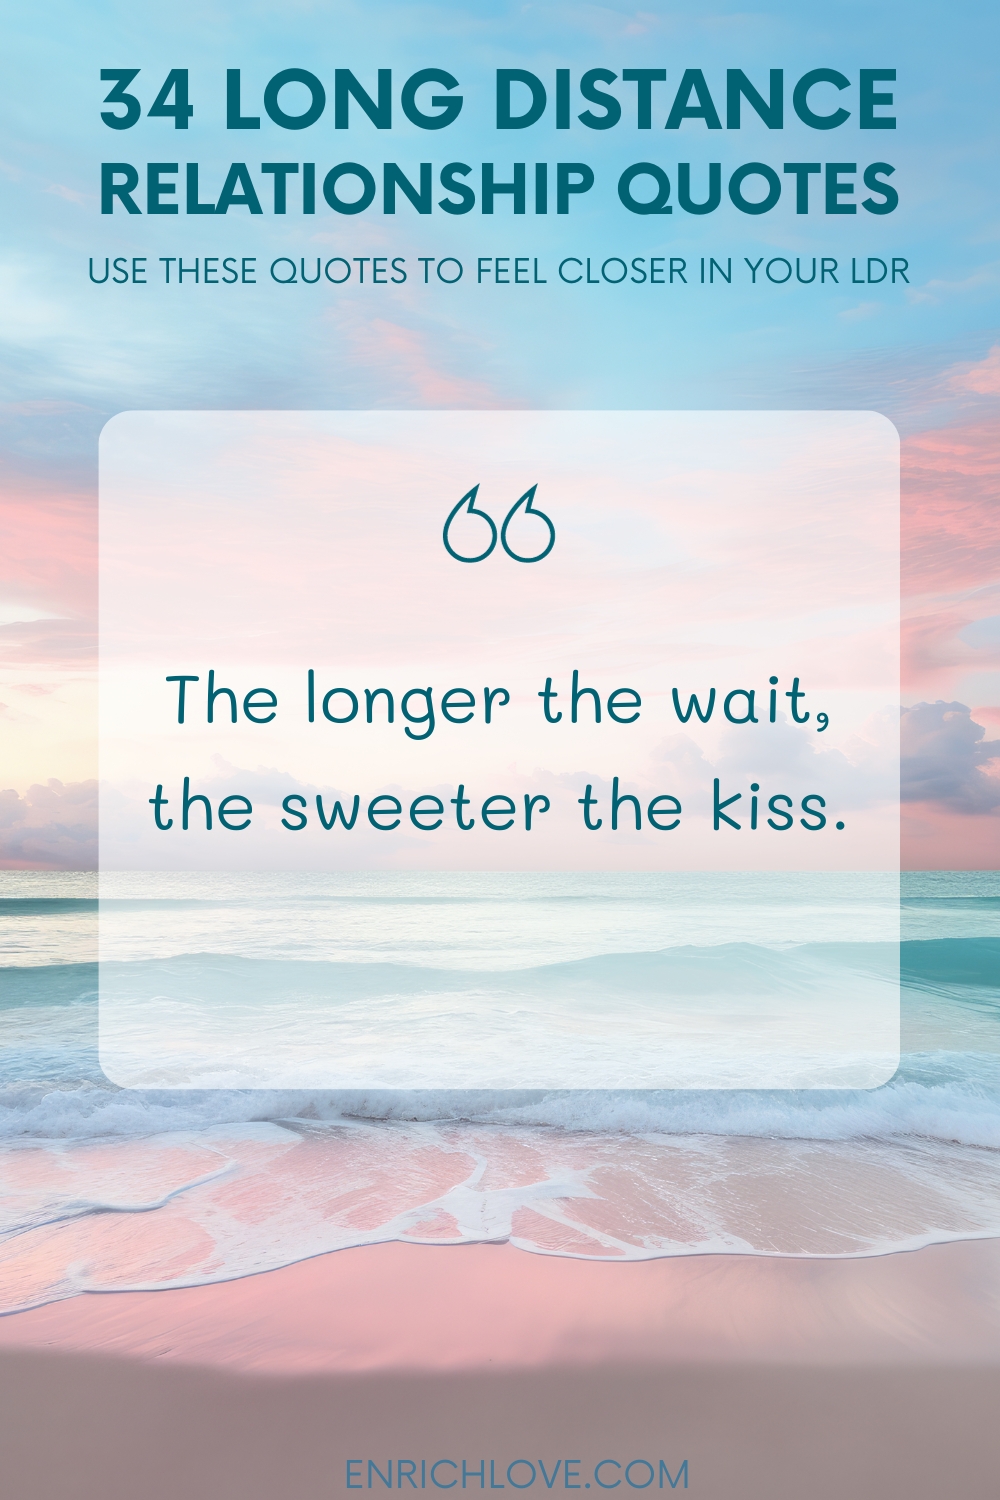 34 Long Distance Relationship Quotes - The longer the wait, the sweeter the kiss.